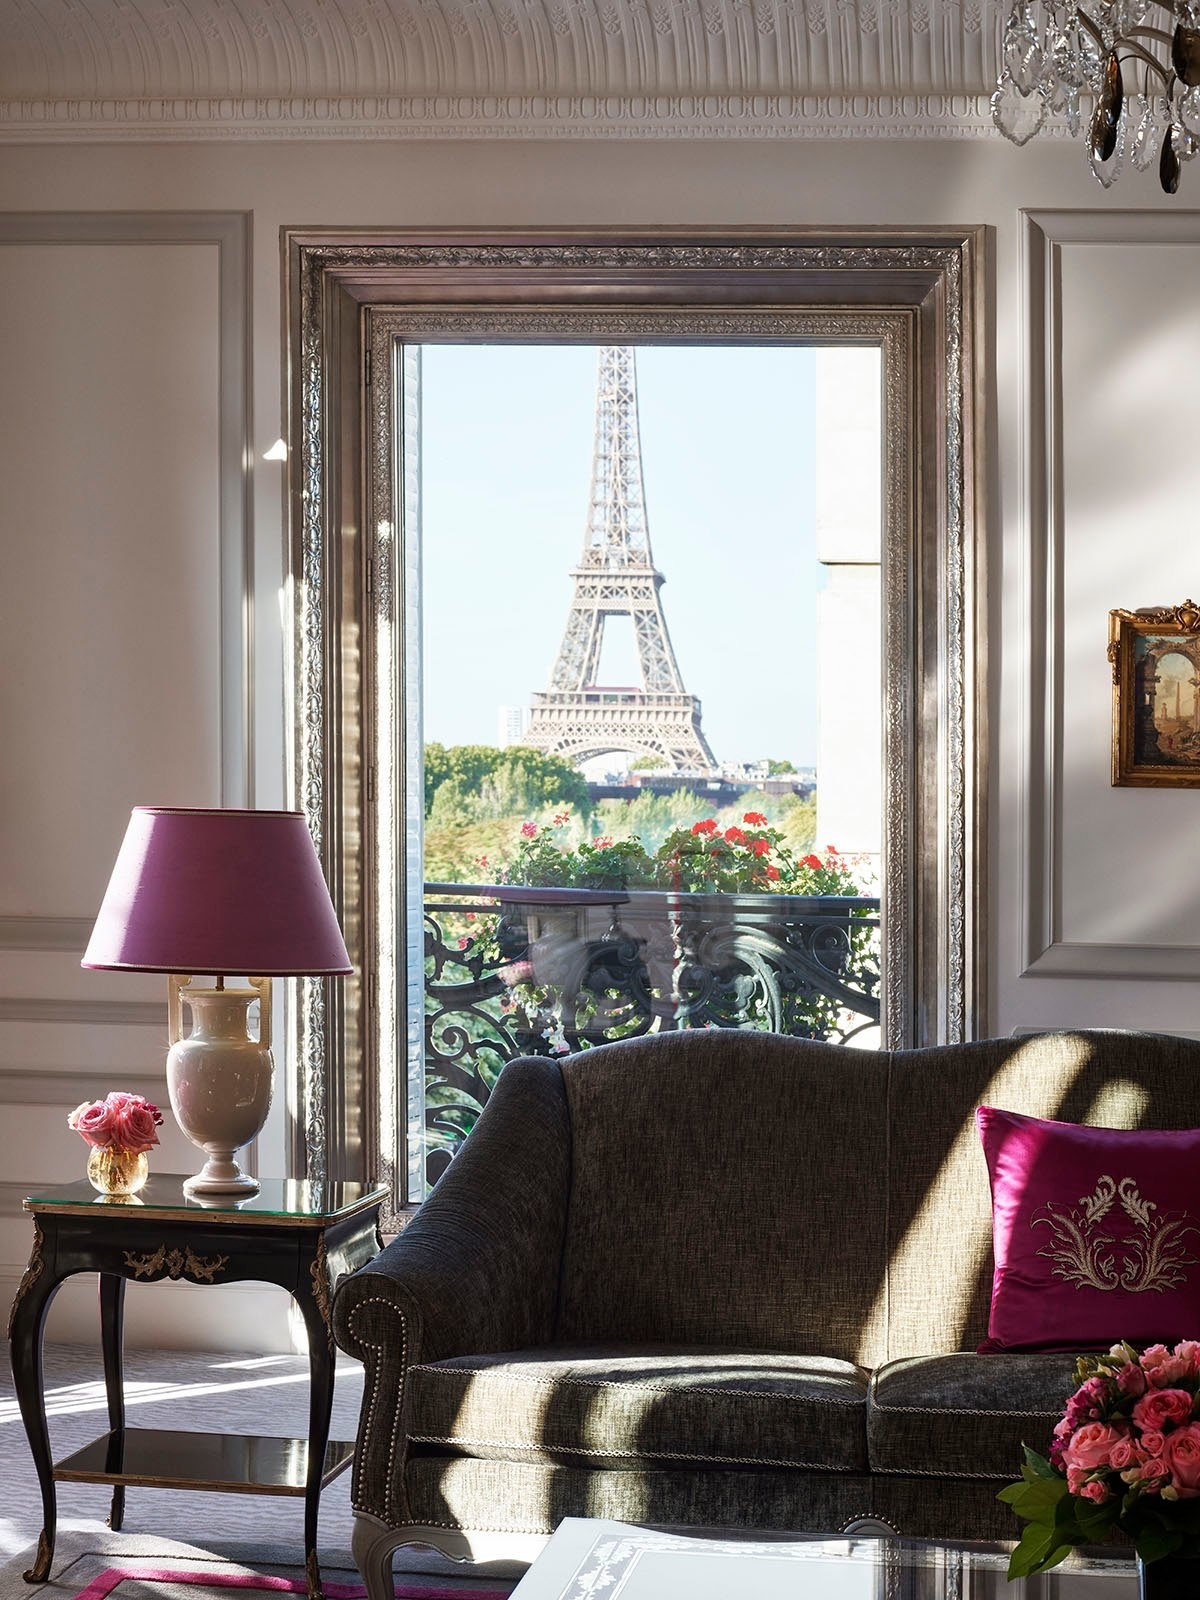 the hotel room with the Eiffel tower view